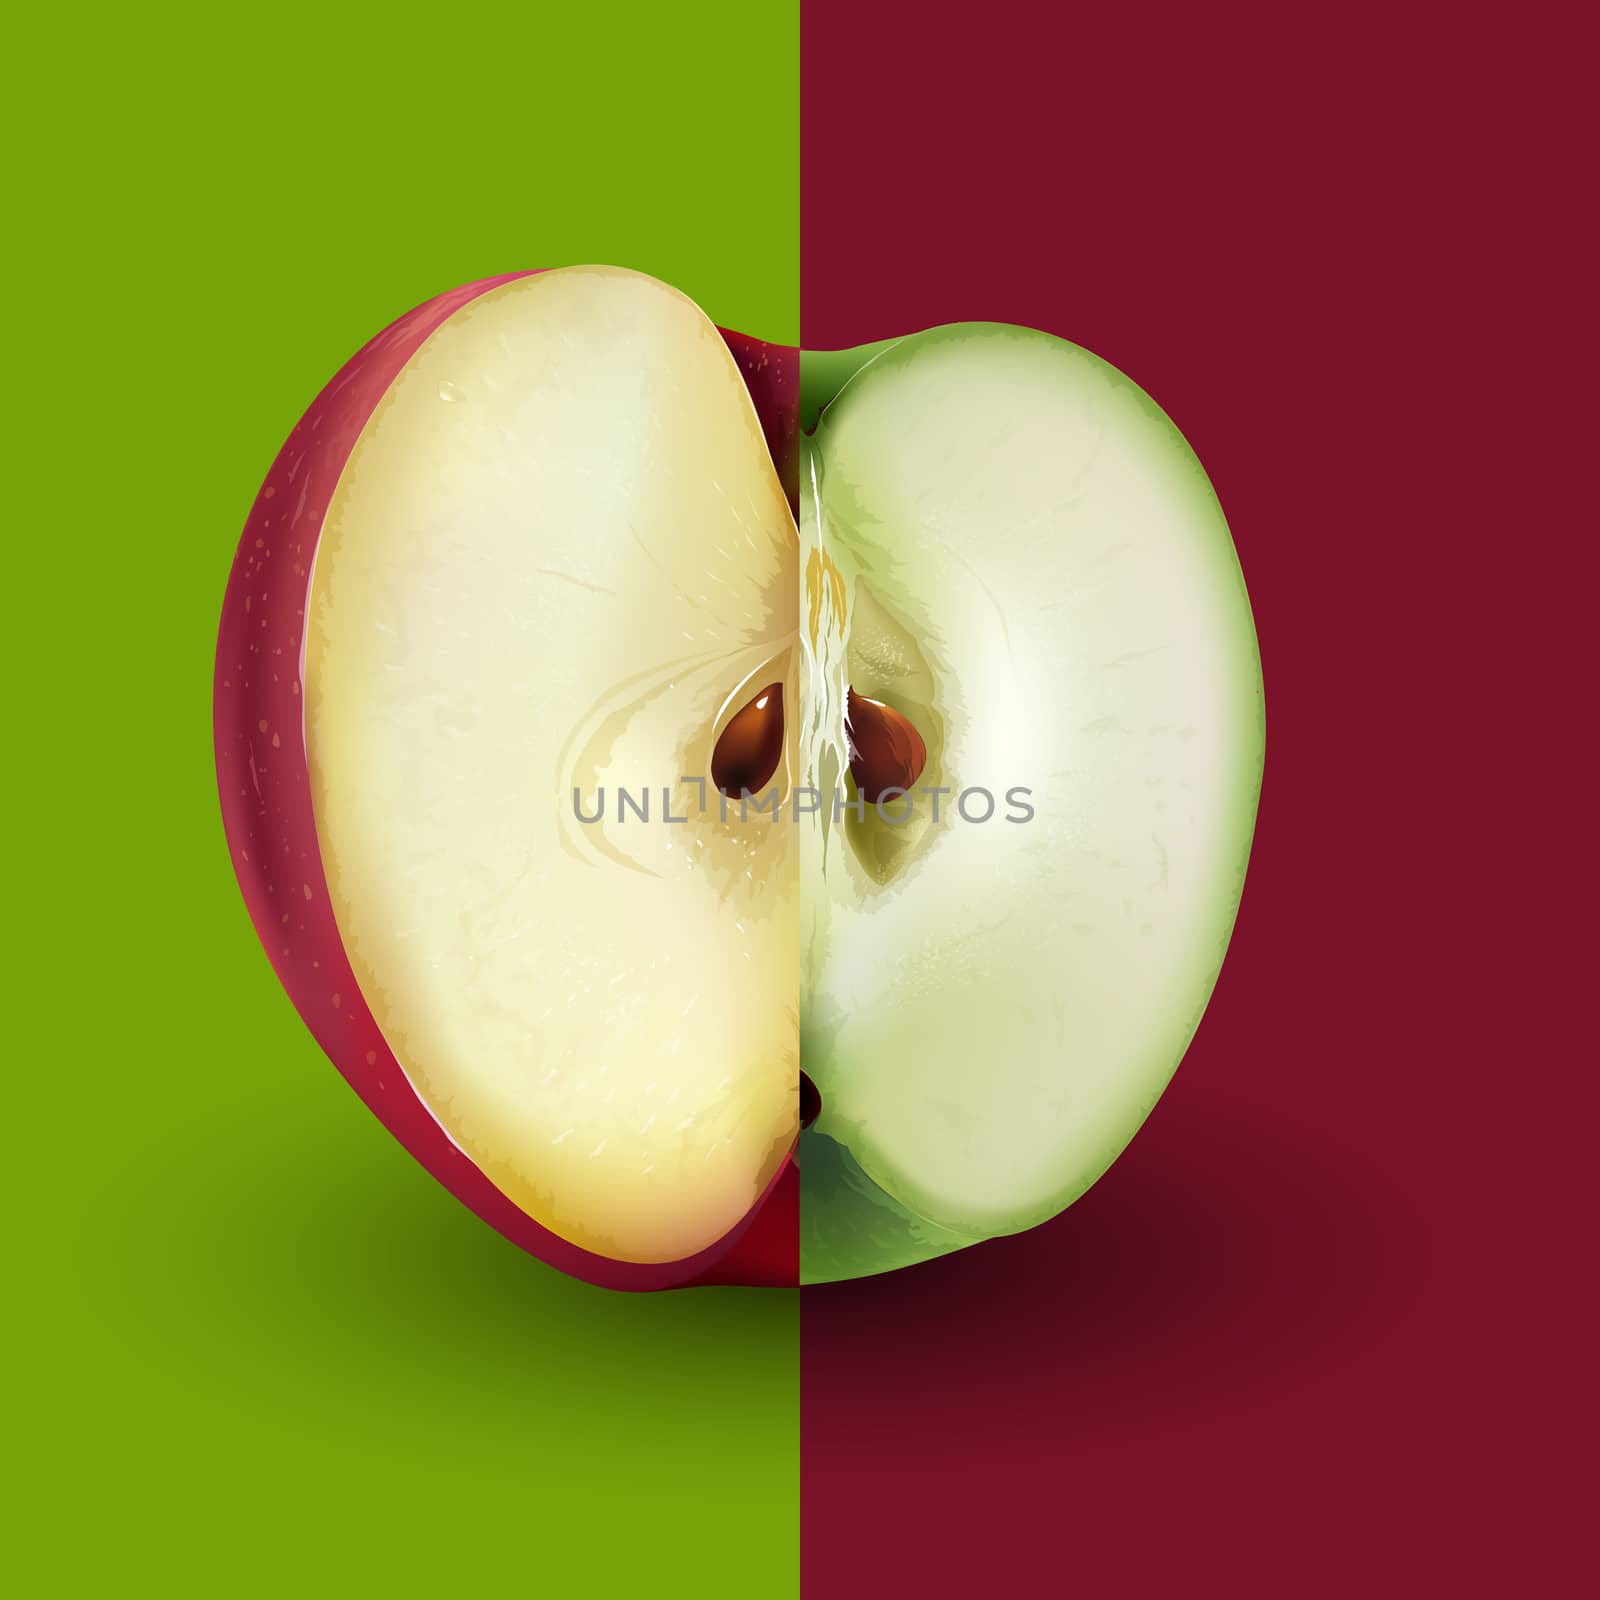 Green and red apples by ConceptCafe